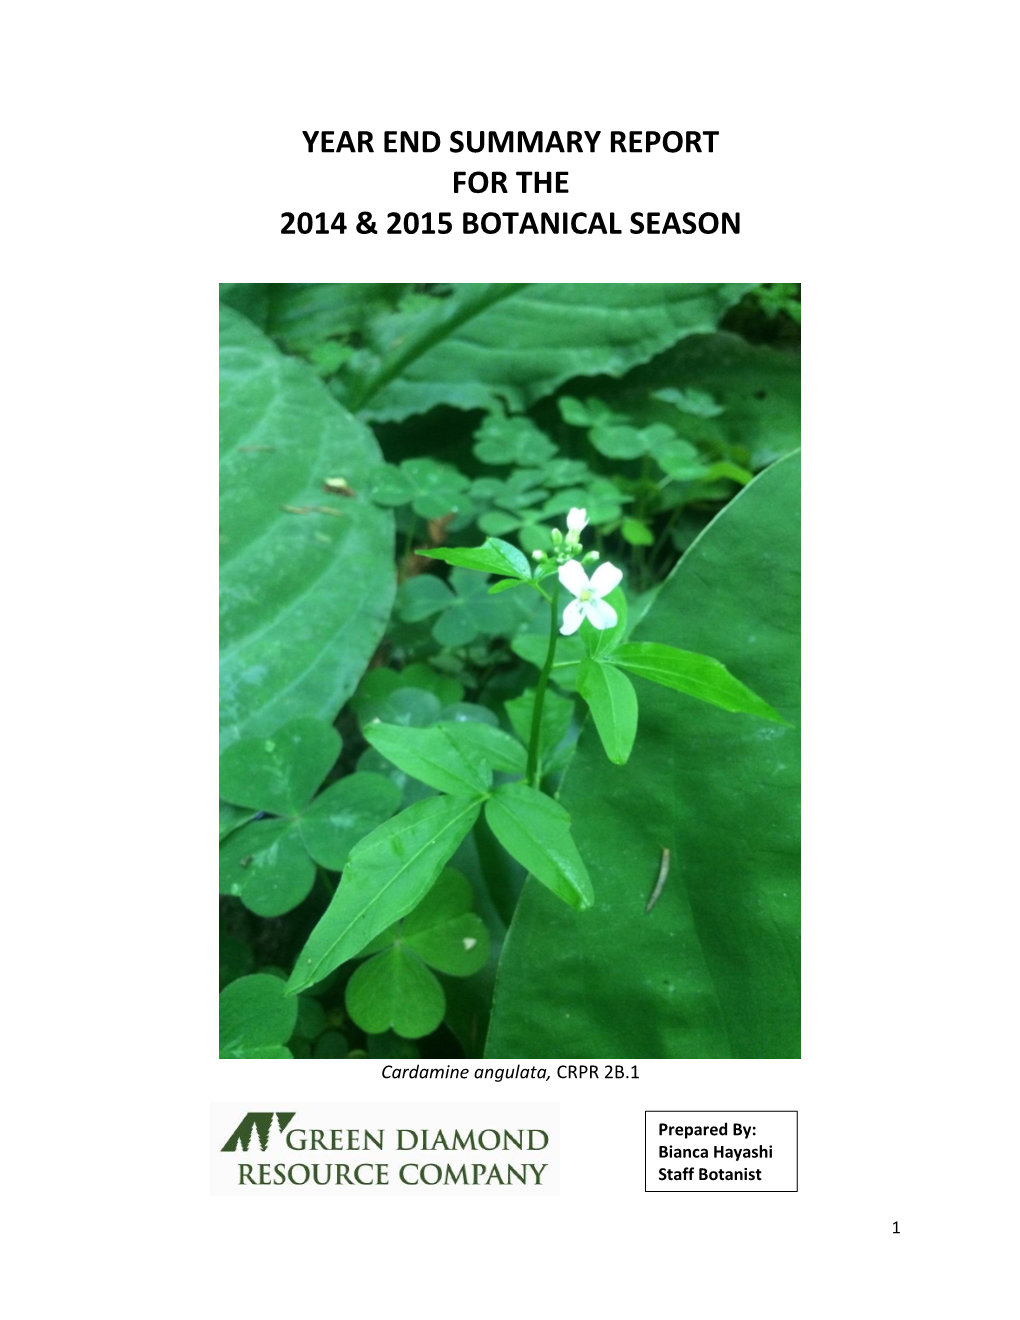 Year End Summary Report for the 2014 & 2015 Botanical